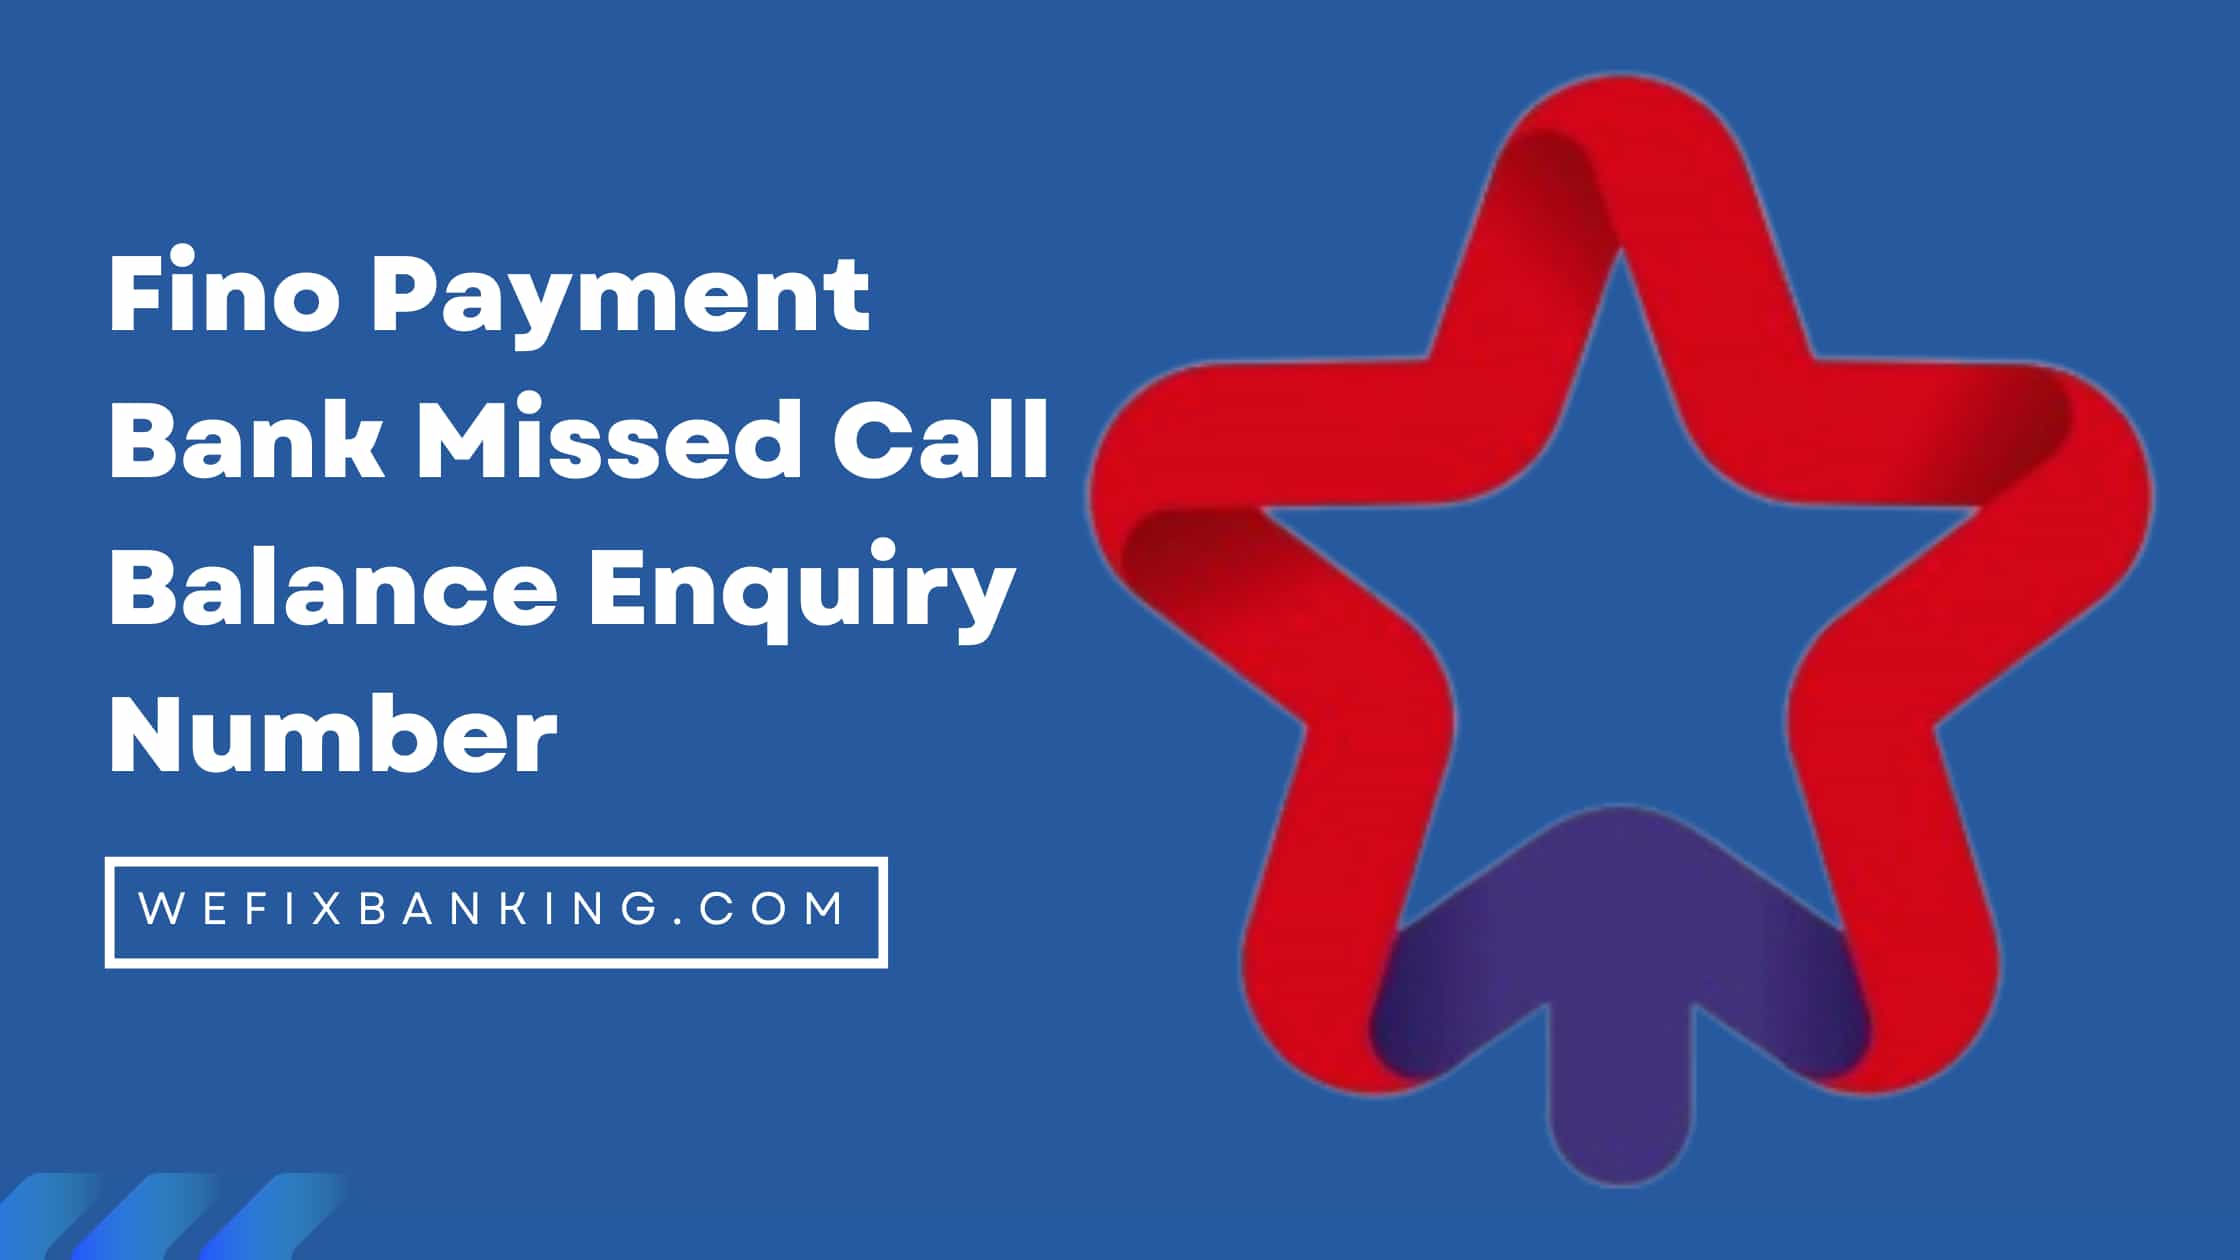 Fino Payment Bank Missed Call Balance Enquiry Number